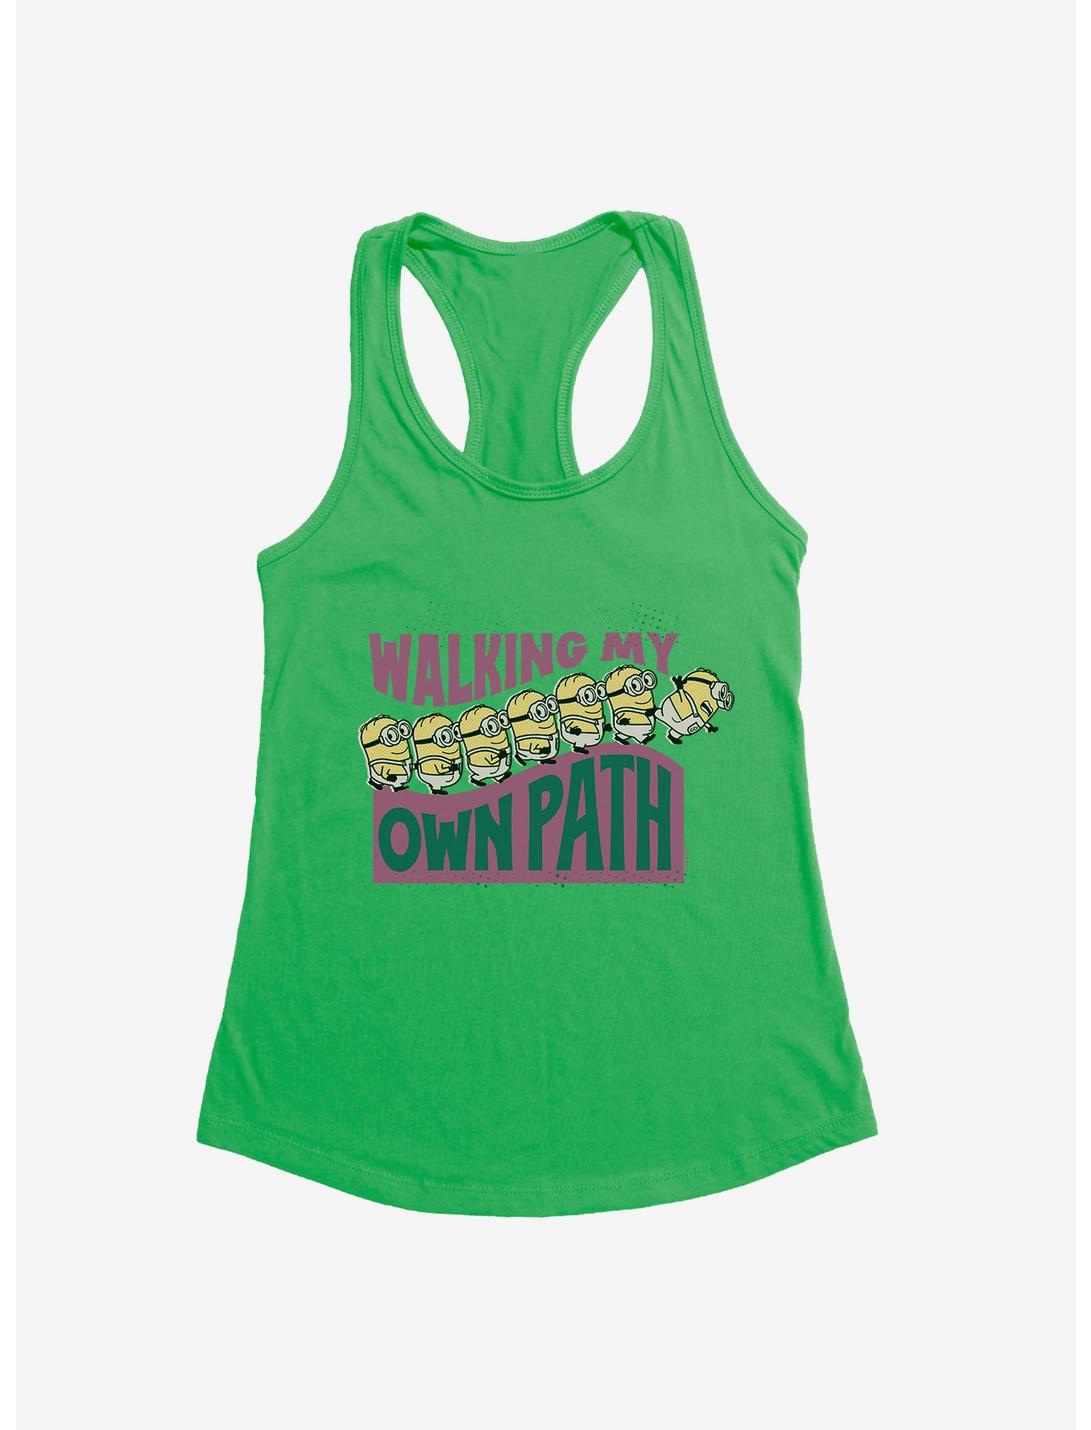 Minions On My Own Path Womens Tank Top, KELLY GREEN, hi-res